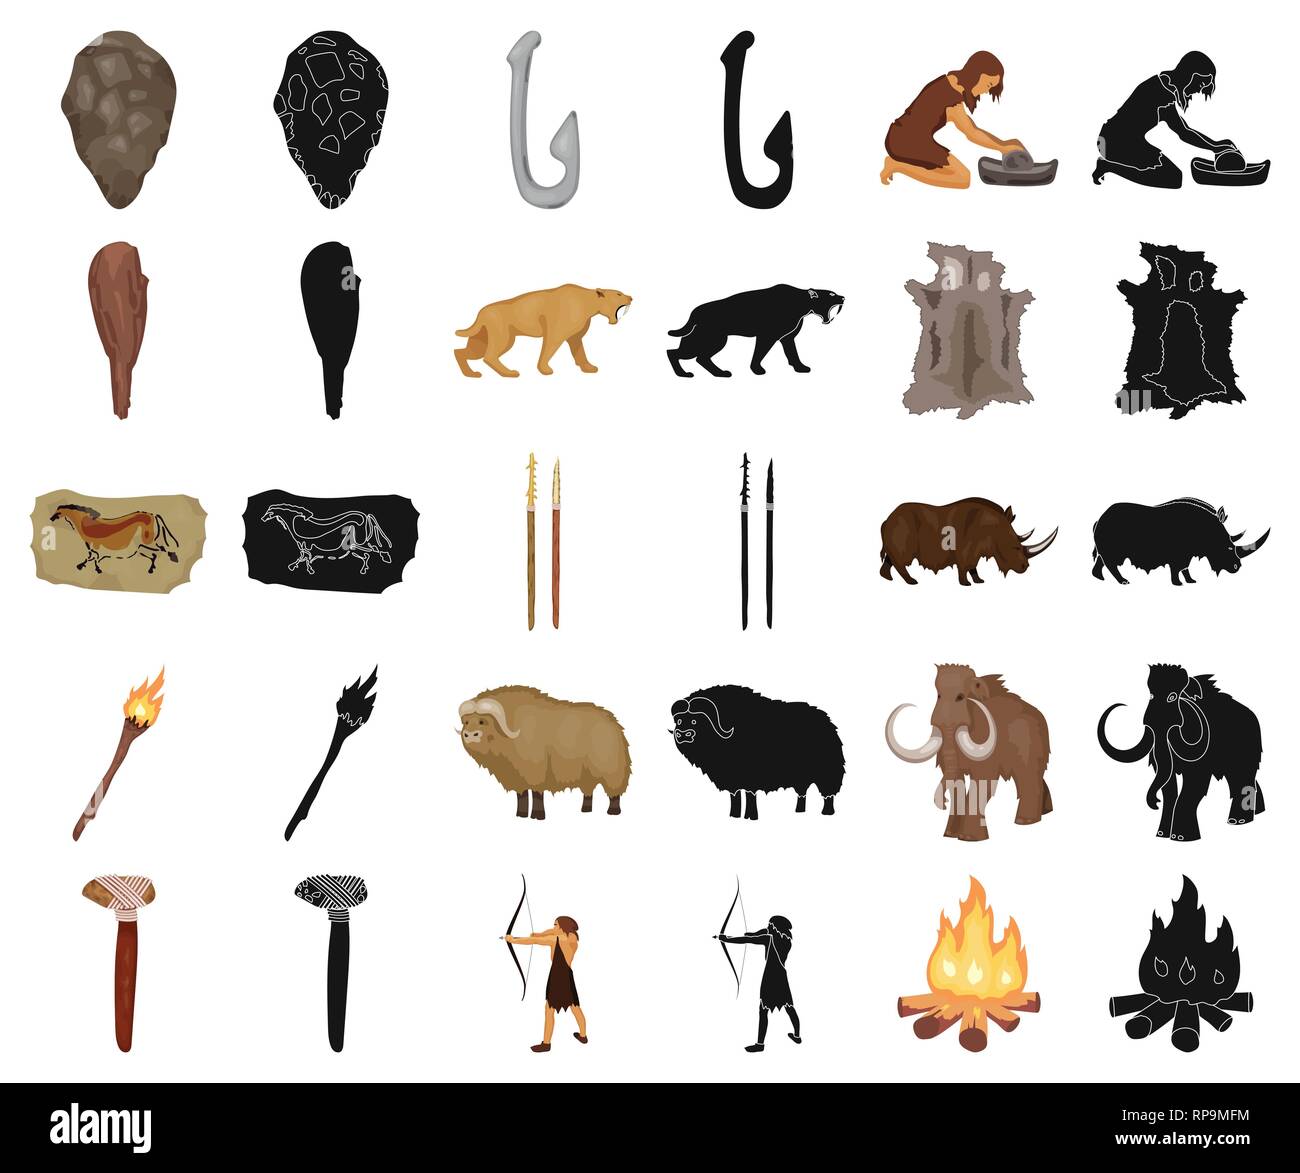 age,ancient,animal,antiquity,arrow,axe,beginning,bone,bow,campfire,cartoon,black,caveman,cavewoman,collection,culture,design,development,epoch,fauna,fish,grindstone,hide,hook,humanity,icon,illustration,isolated,life,logo,man,muskox,painting,people,period,rhinoceros,saber-toothed,set,sign,spears,stone,survival,symbol,tiger,tool,torch,truncheon,vector,venus,web,woolly mammoth Vector Vectors , Stock Vector